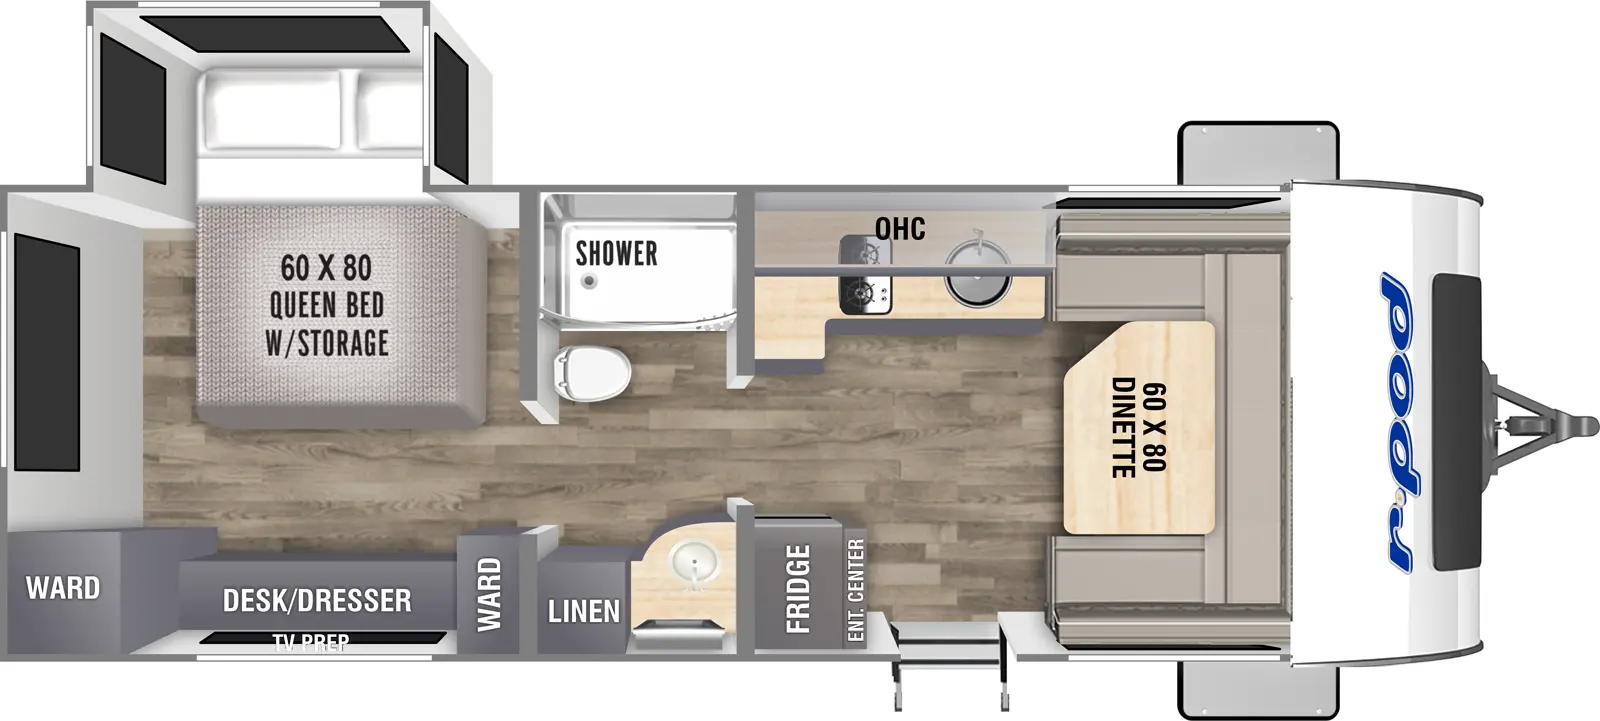 The RP-204 has one slideout and one entry. Interior layout front to back: U-shaped dinette; door side entry, entertainment center and refrigerator; off-door side kitchen counter with sink and cooktop, and overhead cabinet; split full pass-thru bathroom with linen closet; rear bedroom with off-door side queen bed slideout with storage, and door side desk/dresser with TV prep above, and wardrobes on each side.